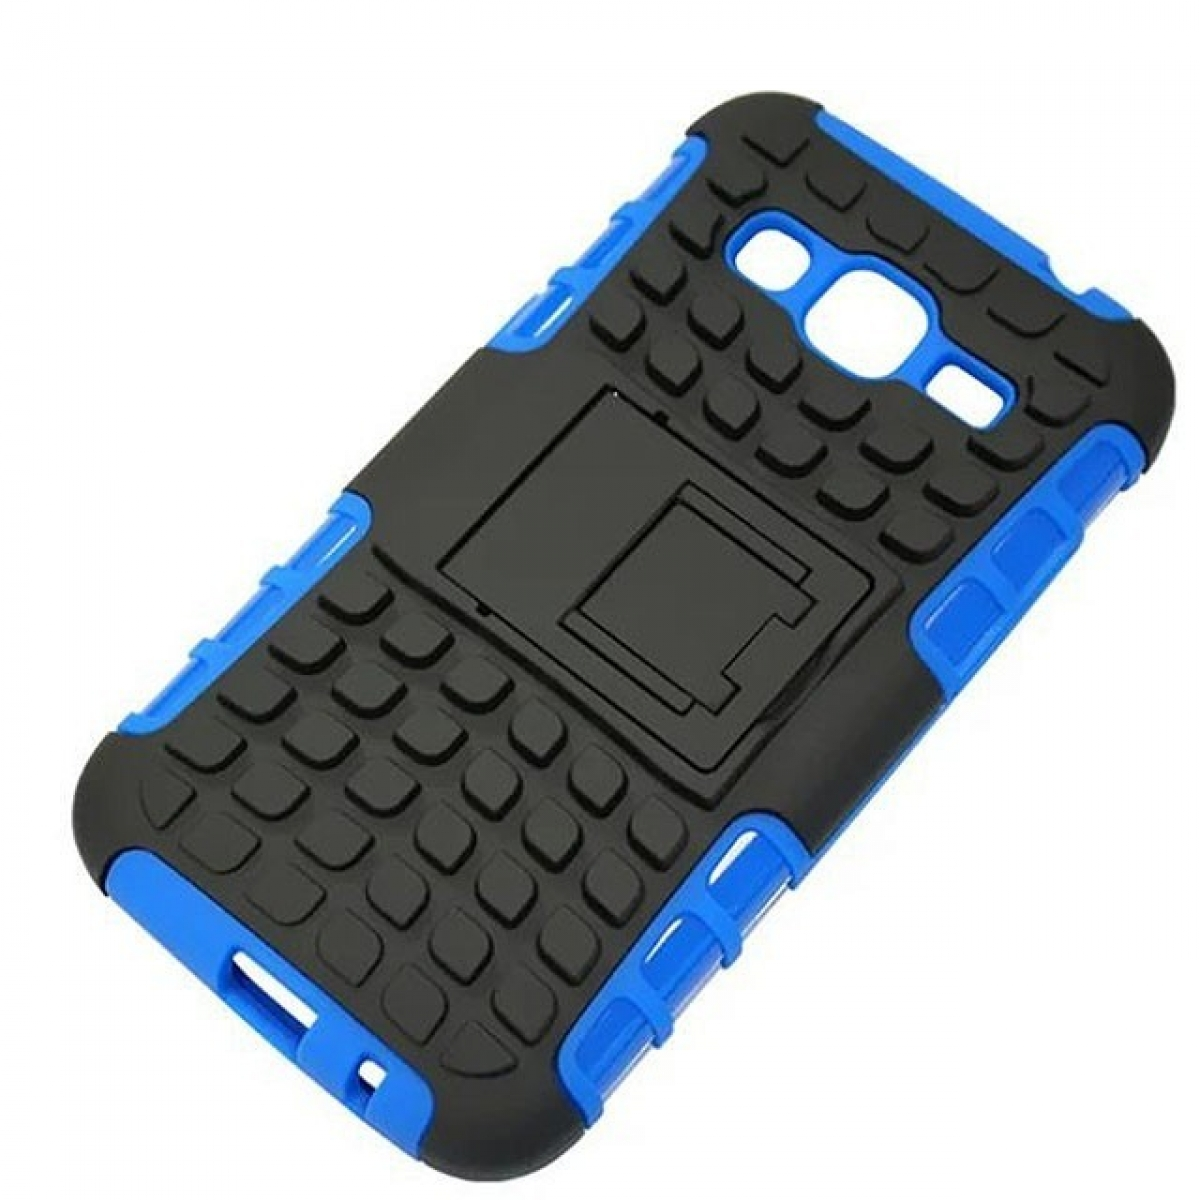 CASEONLINE 2i1, Backcover, Samsung, Rot Core Prime, Galaxy